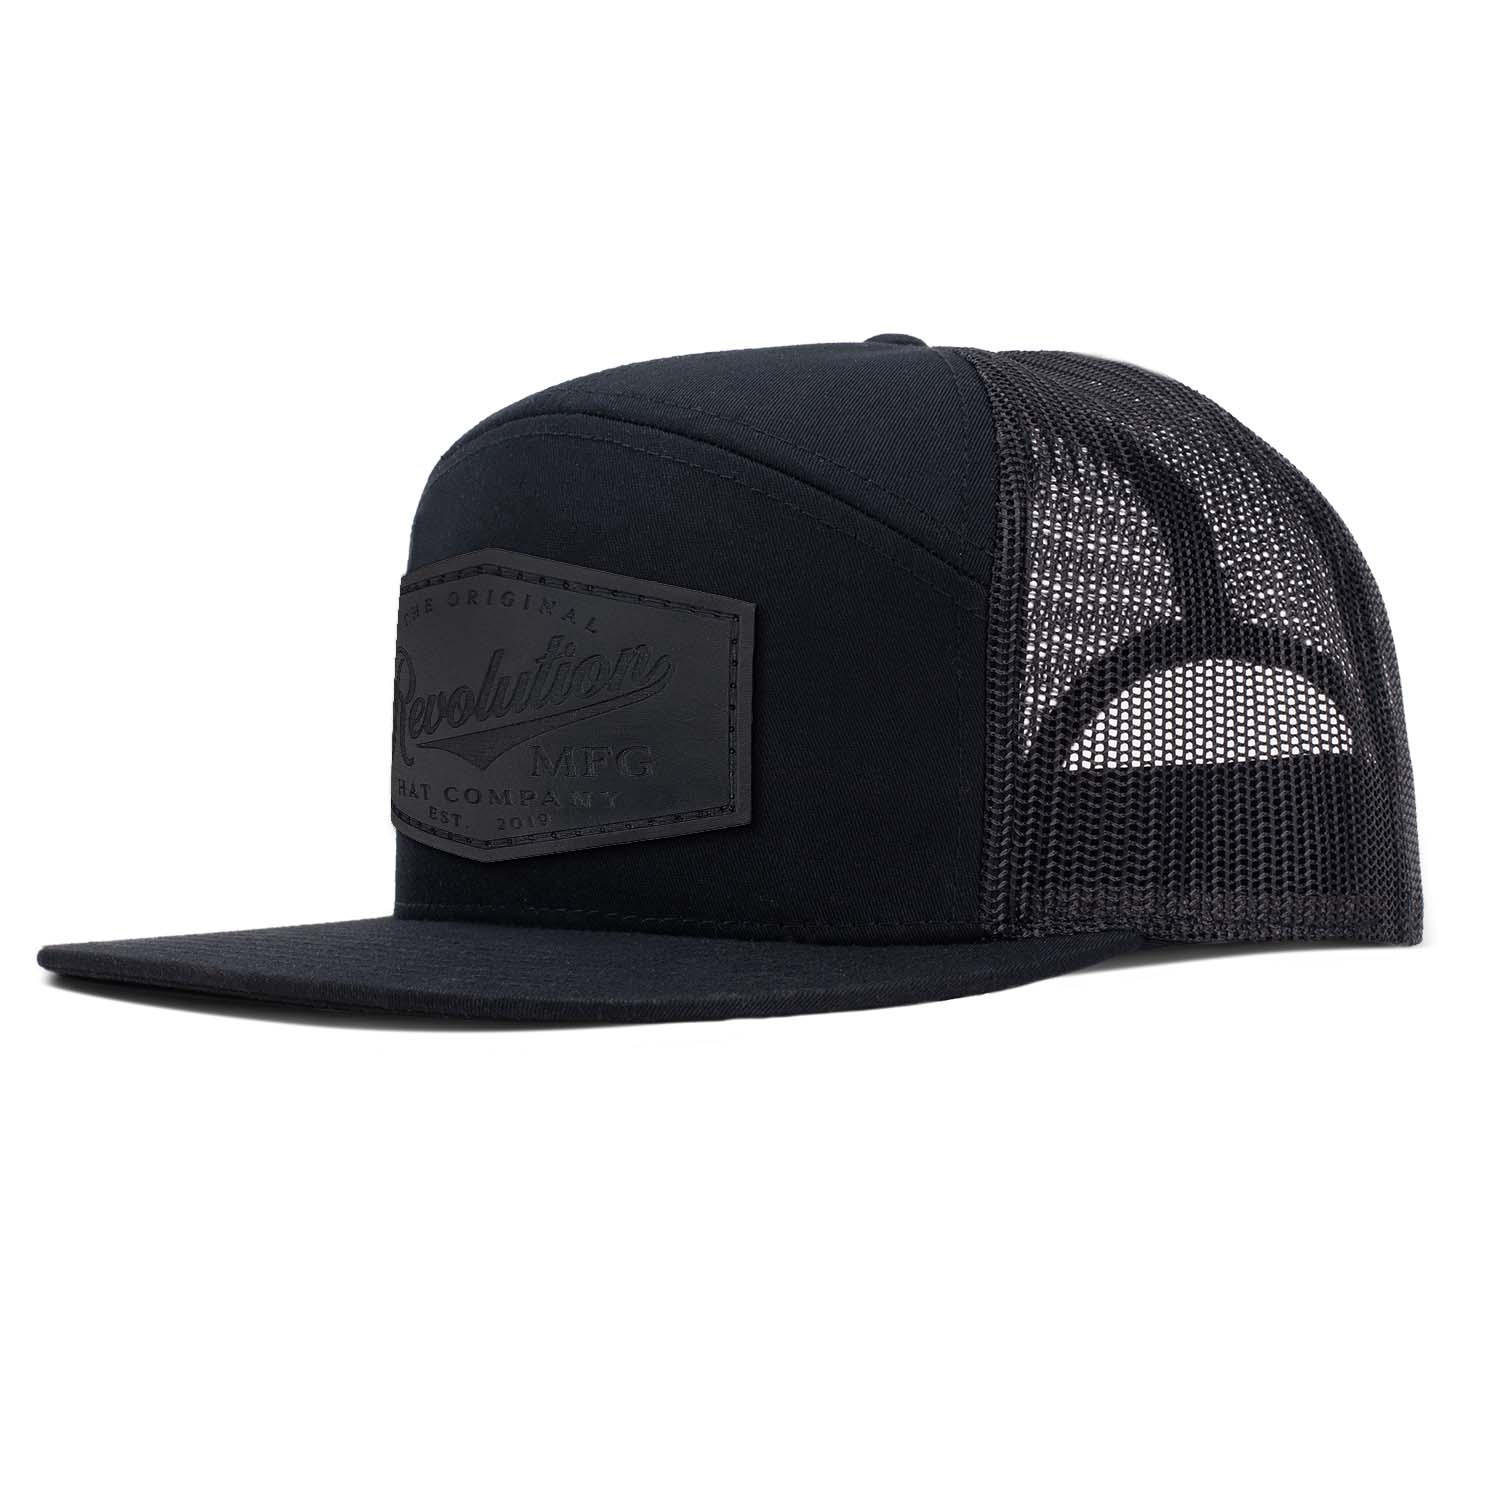 Revolution Mfg black with black mesh 7 panel trucker featuring our full grain black leather Revolution Hat Co patch on the seamless front panel.